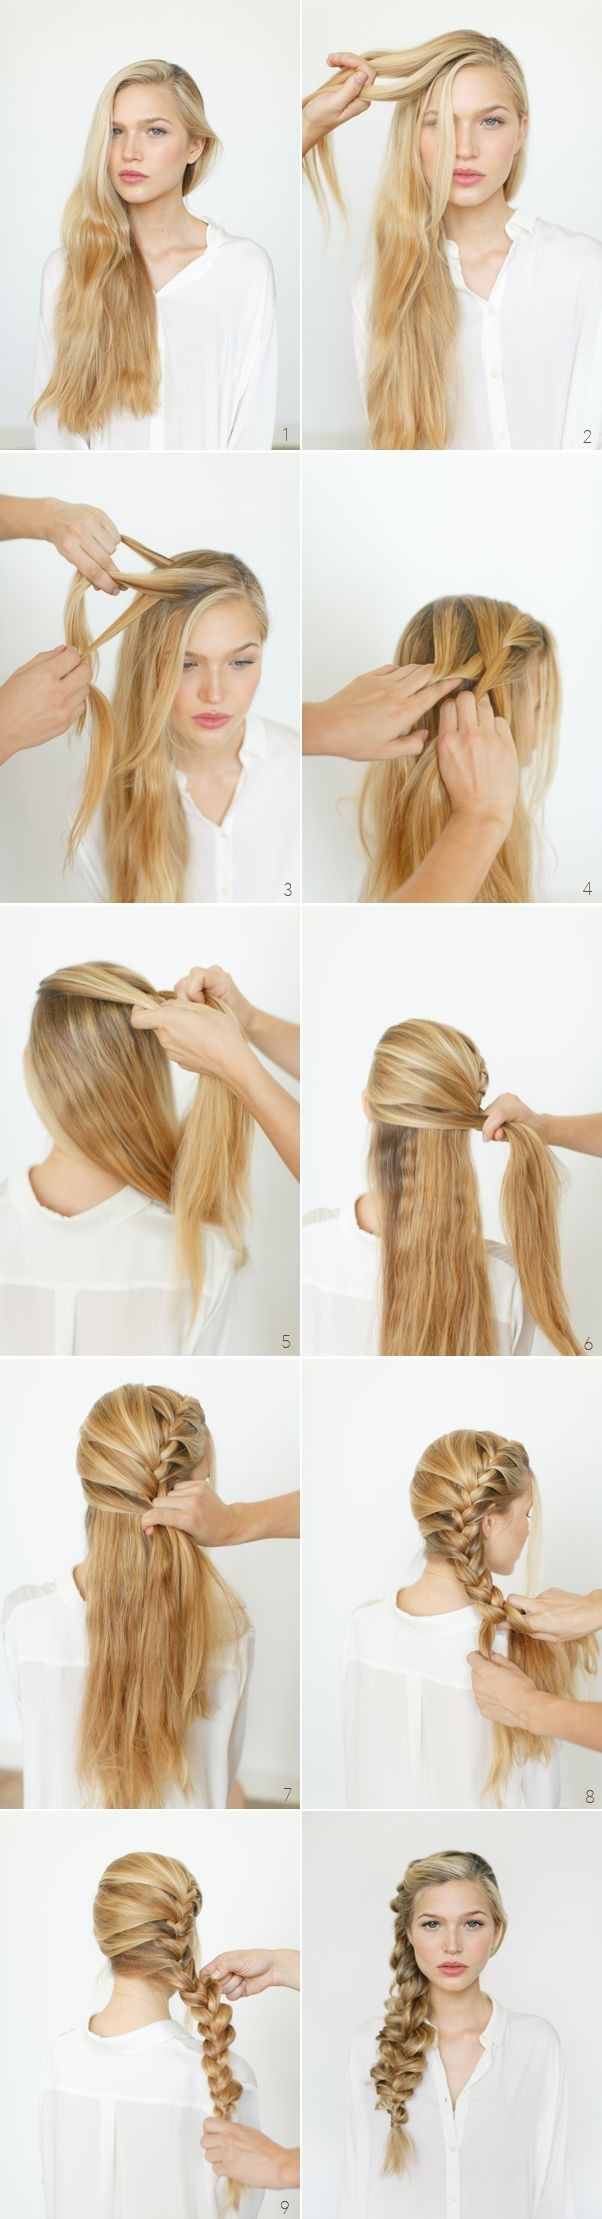 Hairstyles For Long Hair Braids Steps PictureFuneral Program Designs